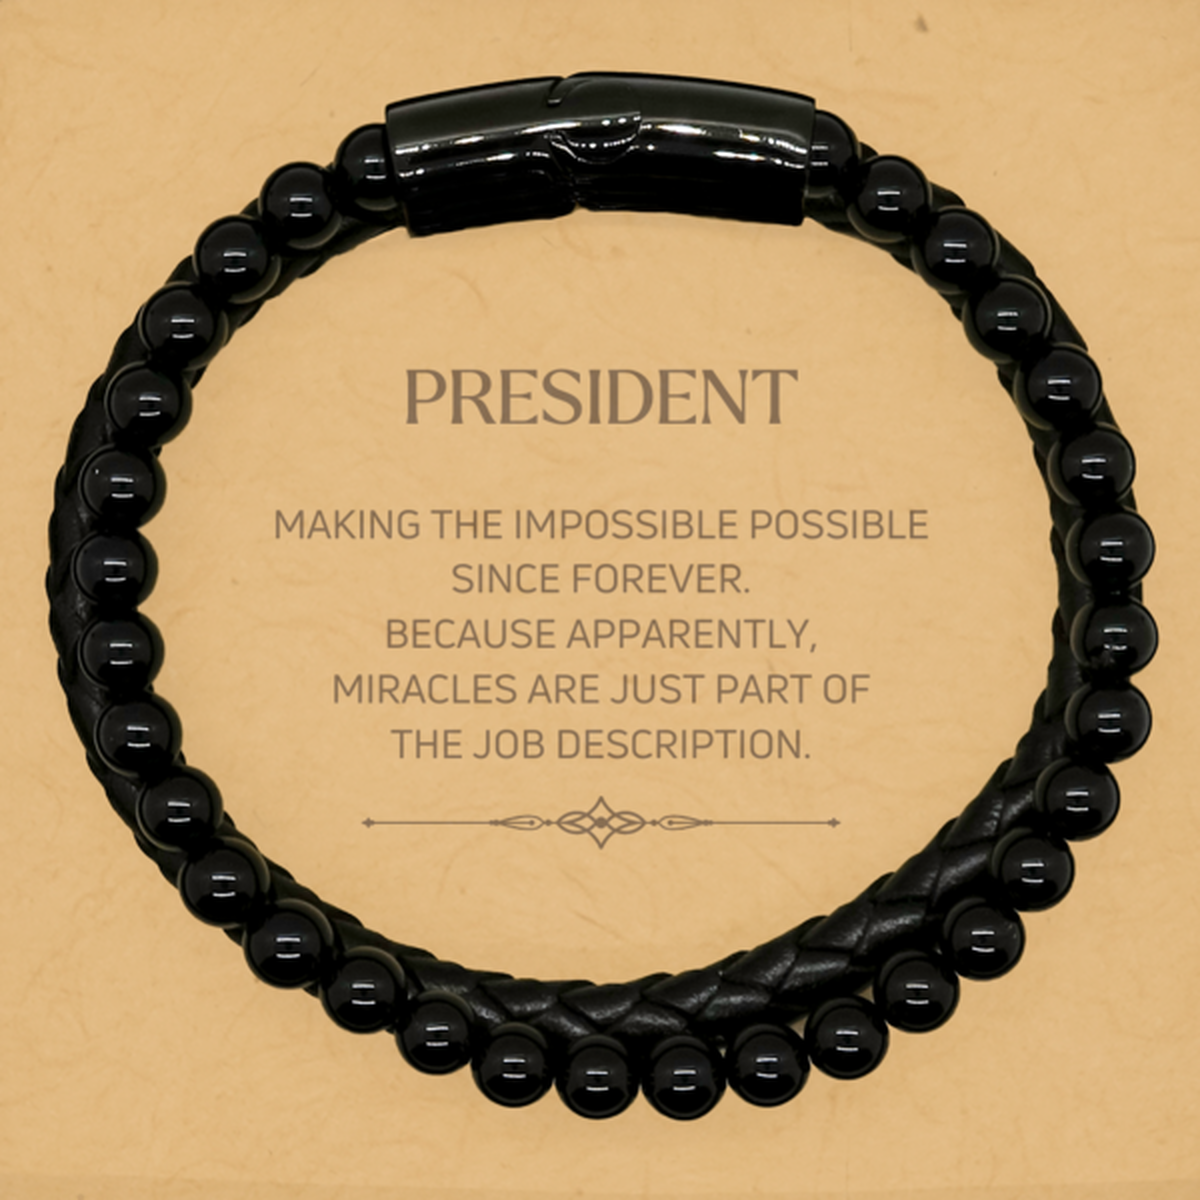 Funny President Gifts, Miracles are just part of the job description, Inspirational Birthday Stone Leather Bracelets For President, Men, Women, Coworkers, Friends, Boss